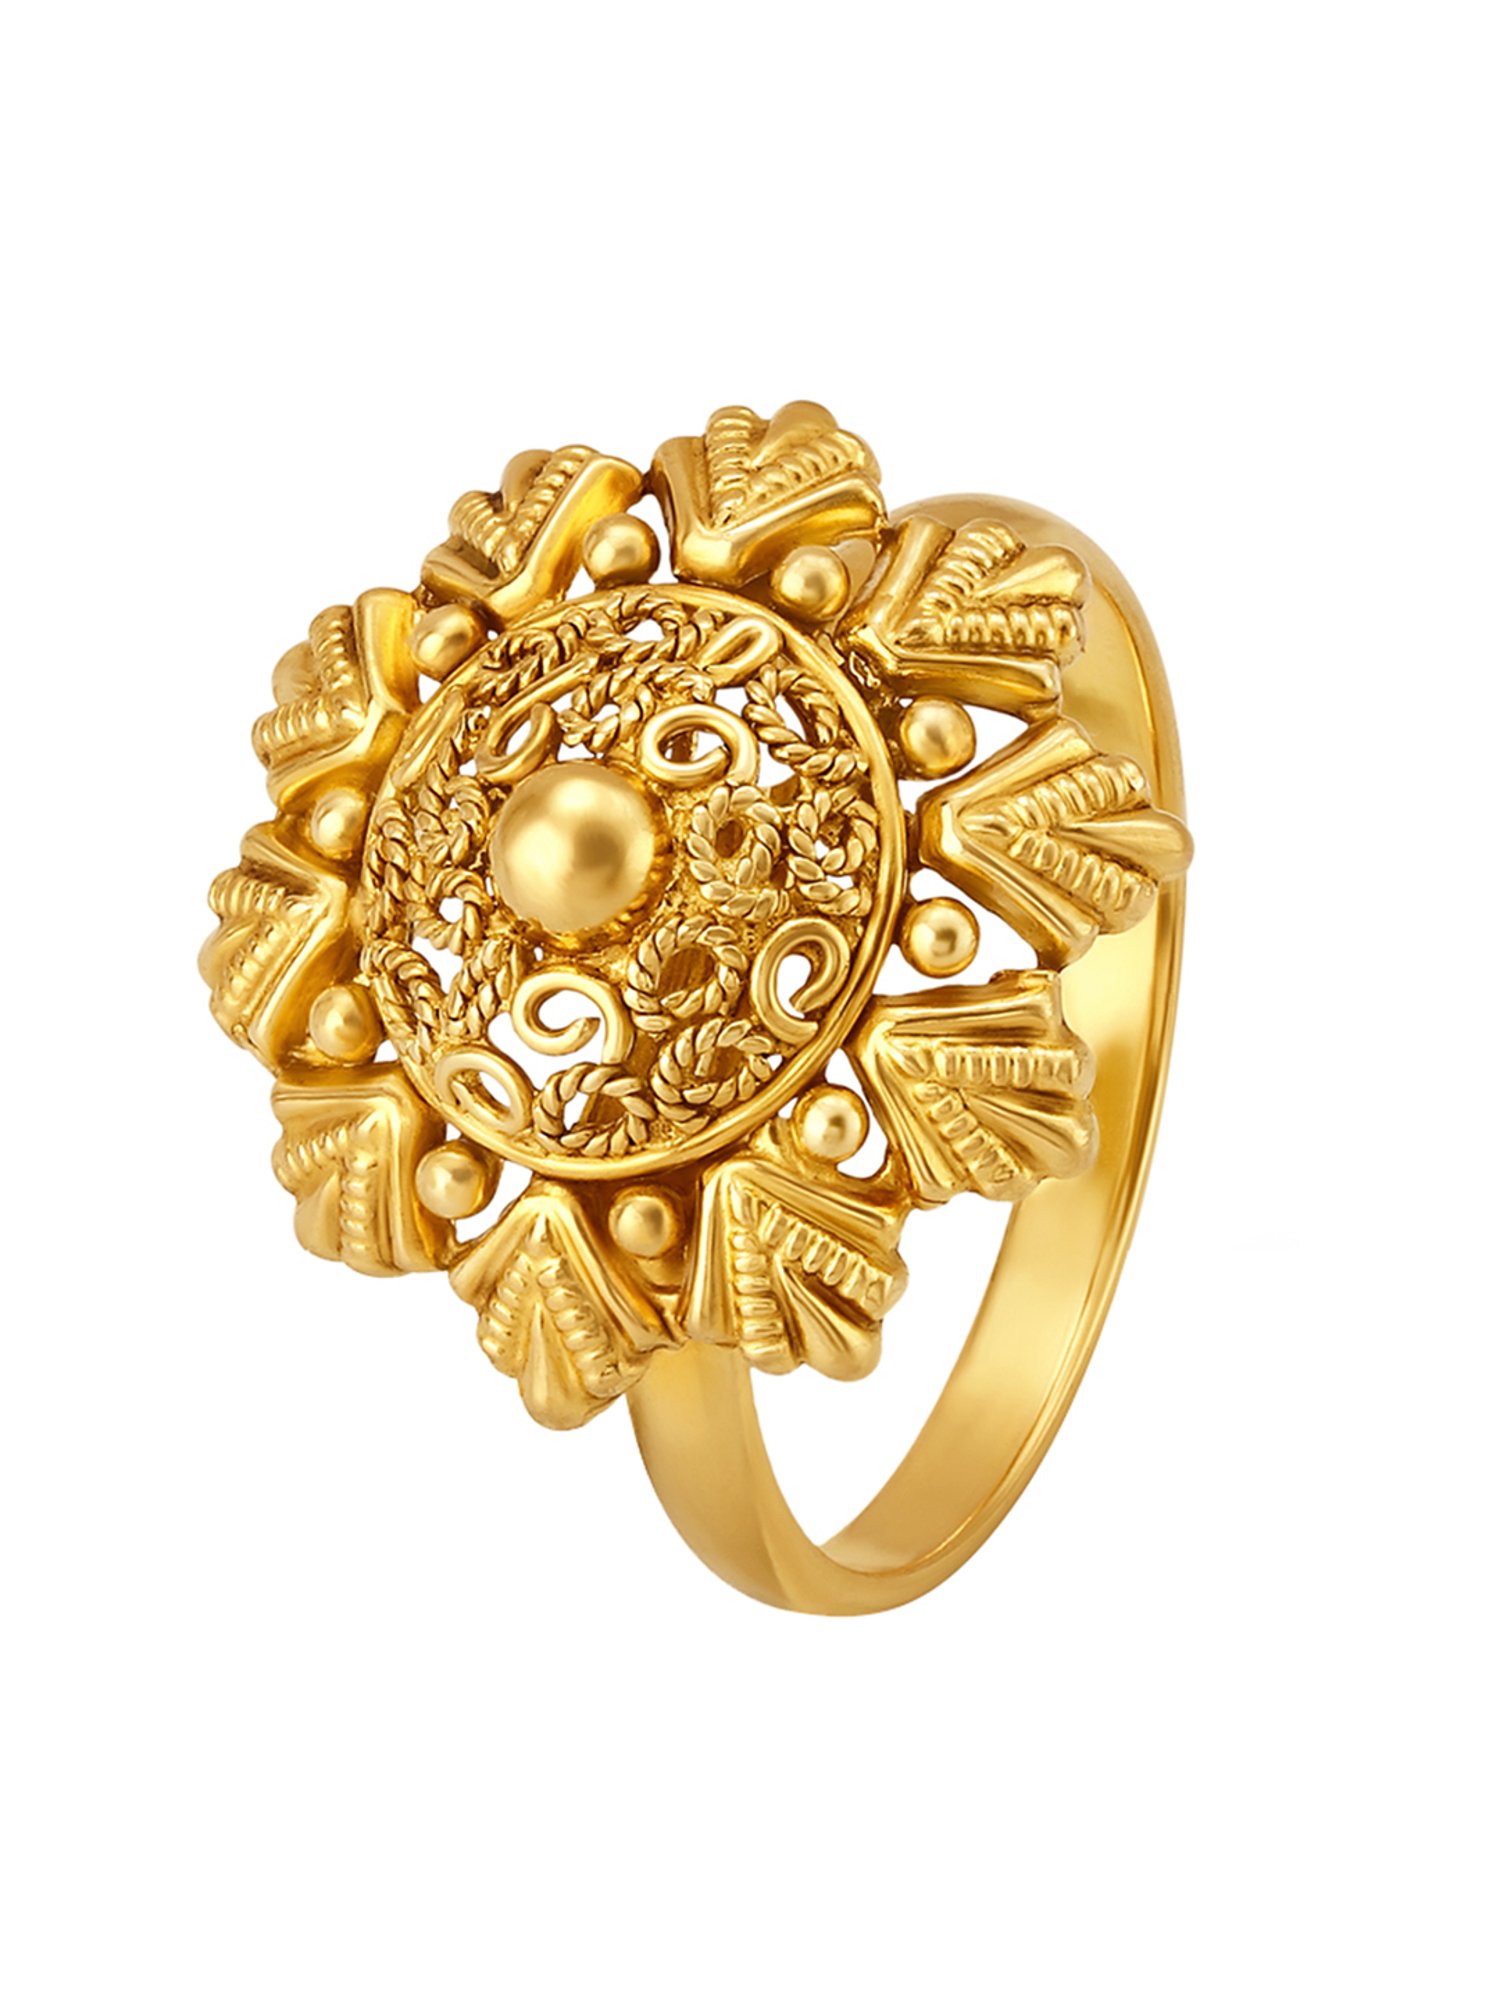 Tanishq Grand Floral Gold Finger Ring Price Starting From Rs 24,871. Find  Verified Sellers in Kozhikode - JdMart